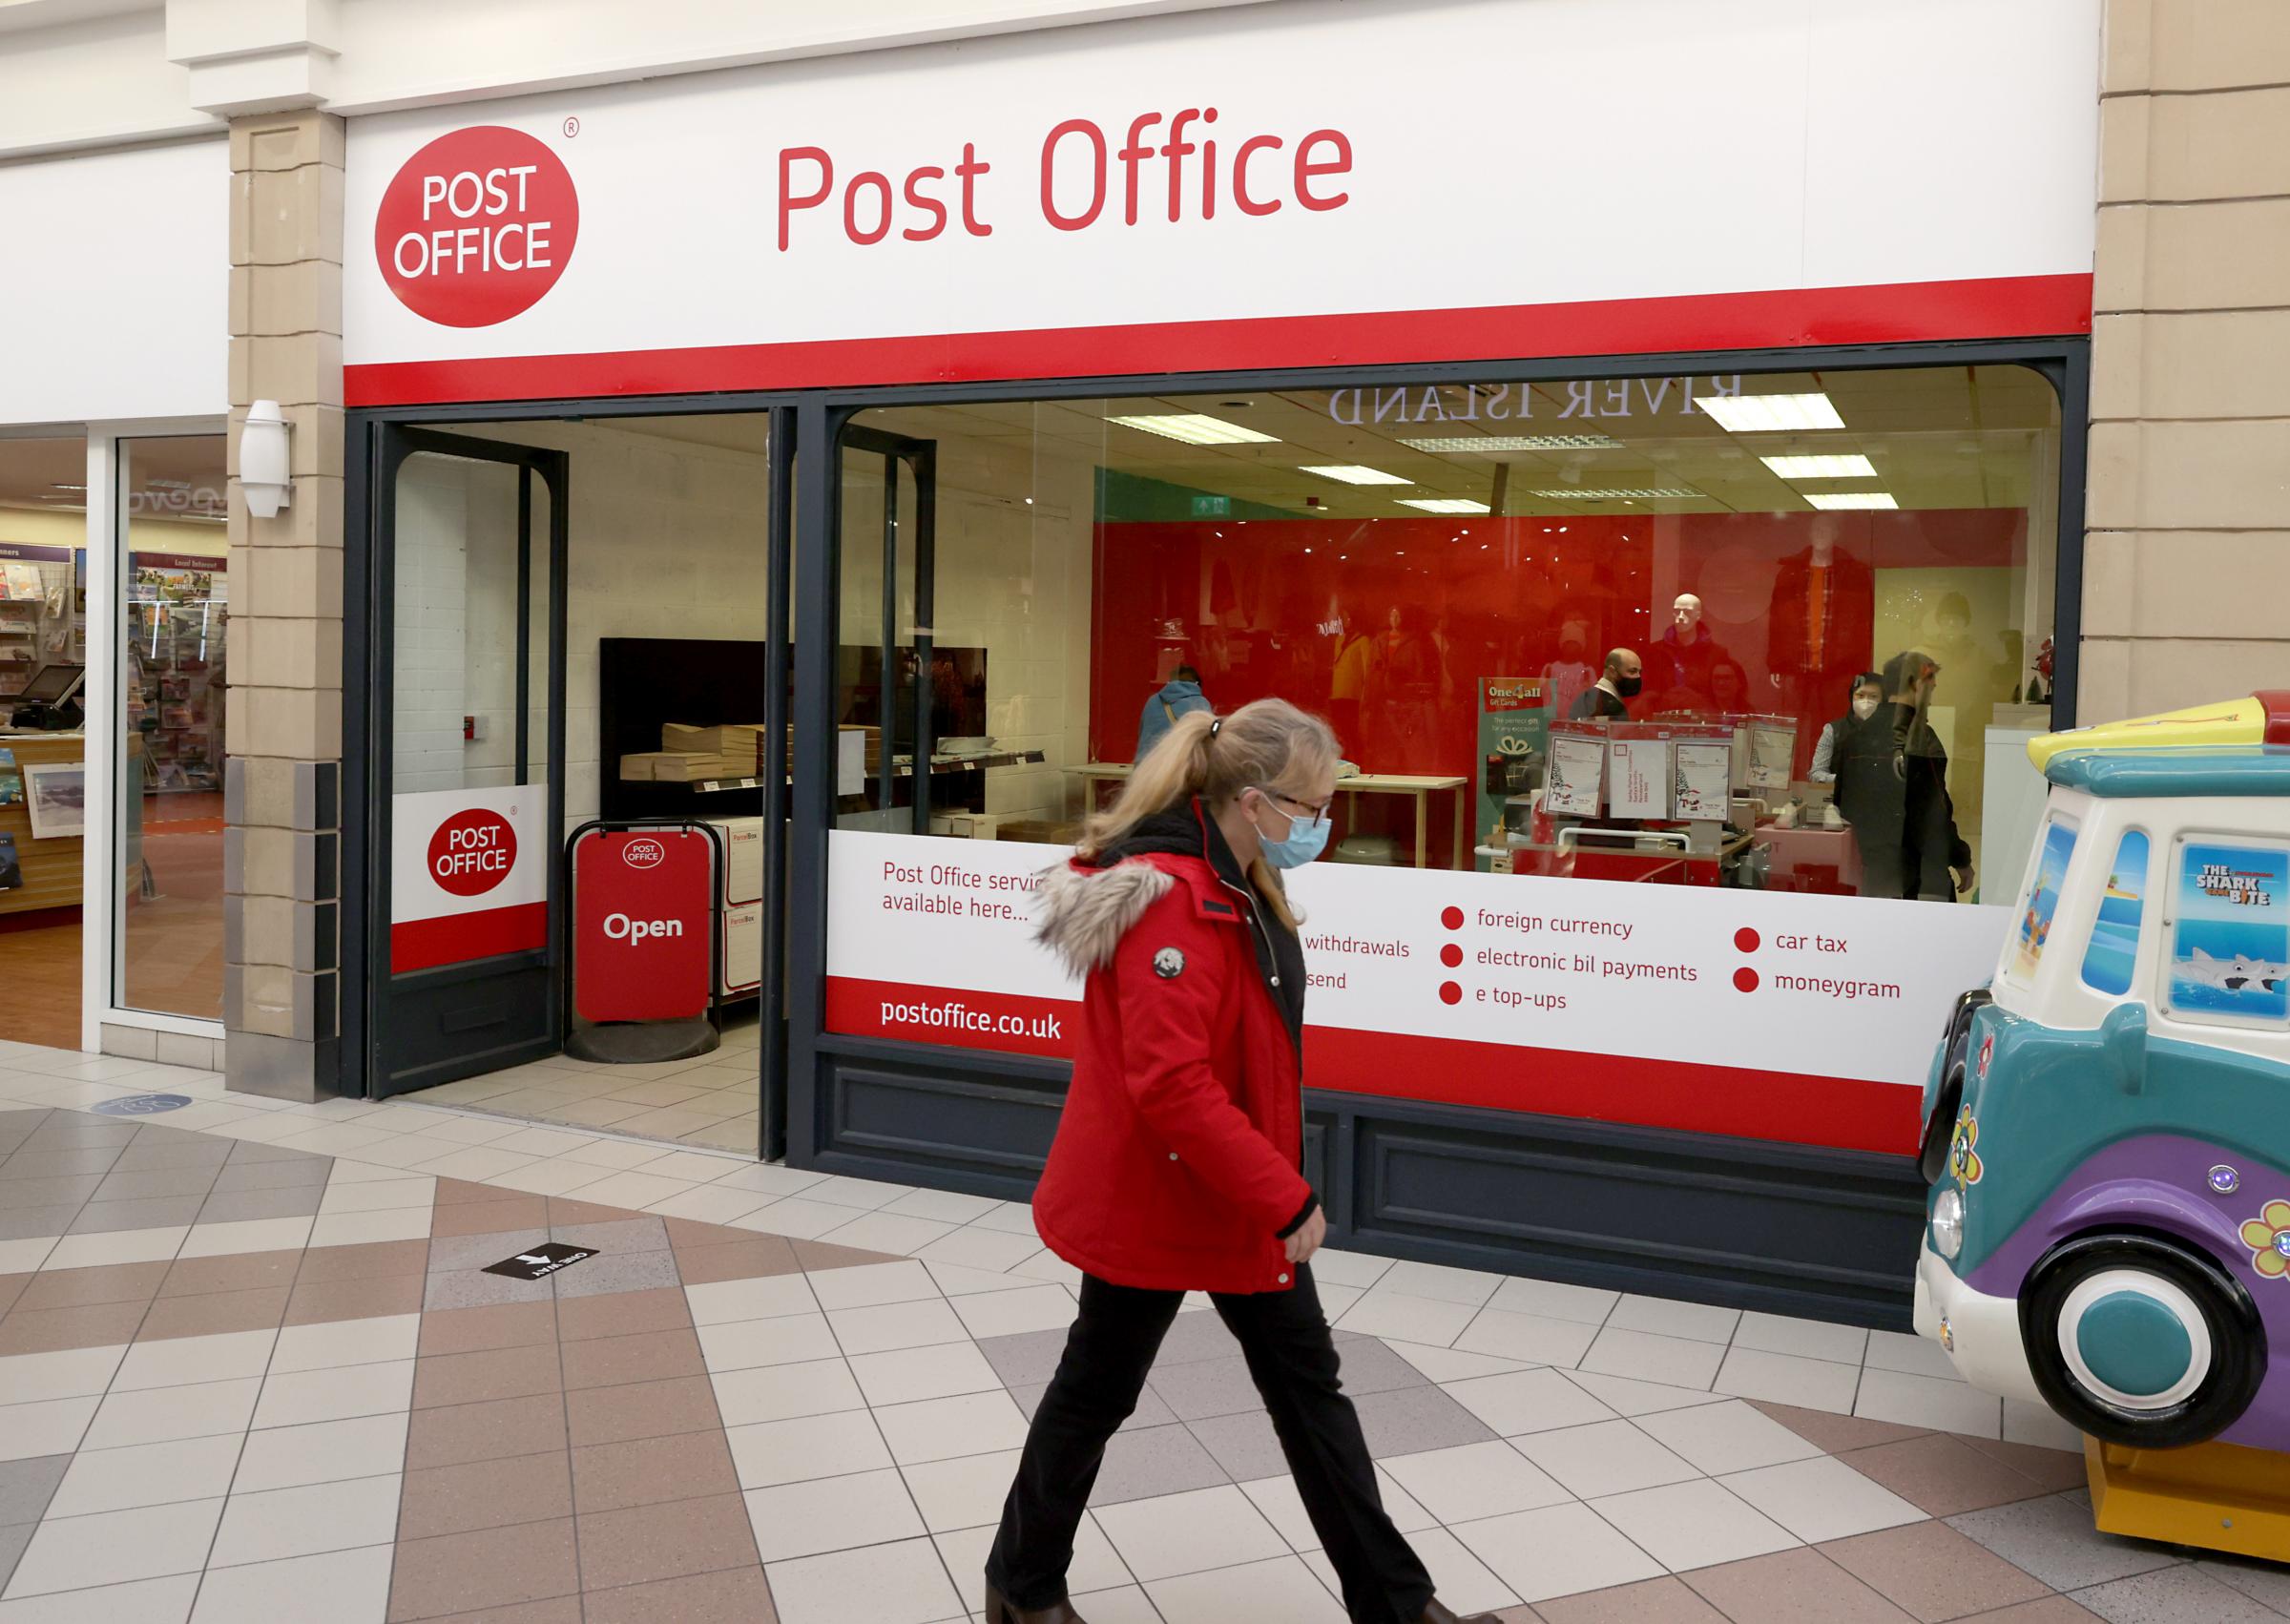 Enniskillen Post Office opens at new temporary location in Fermanagh